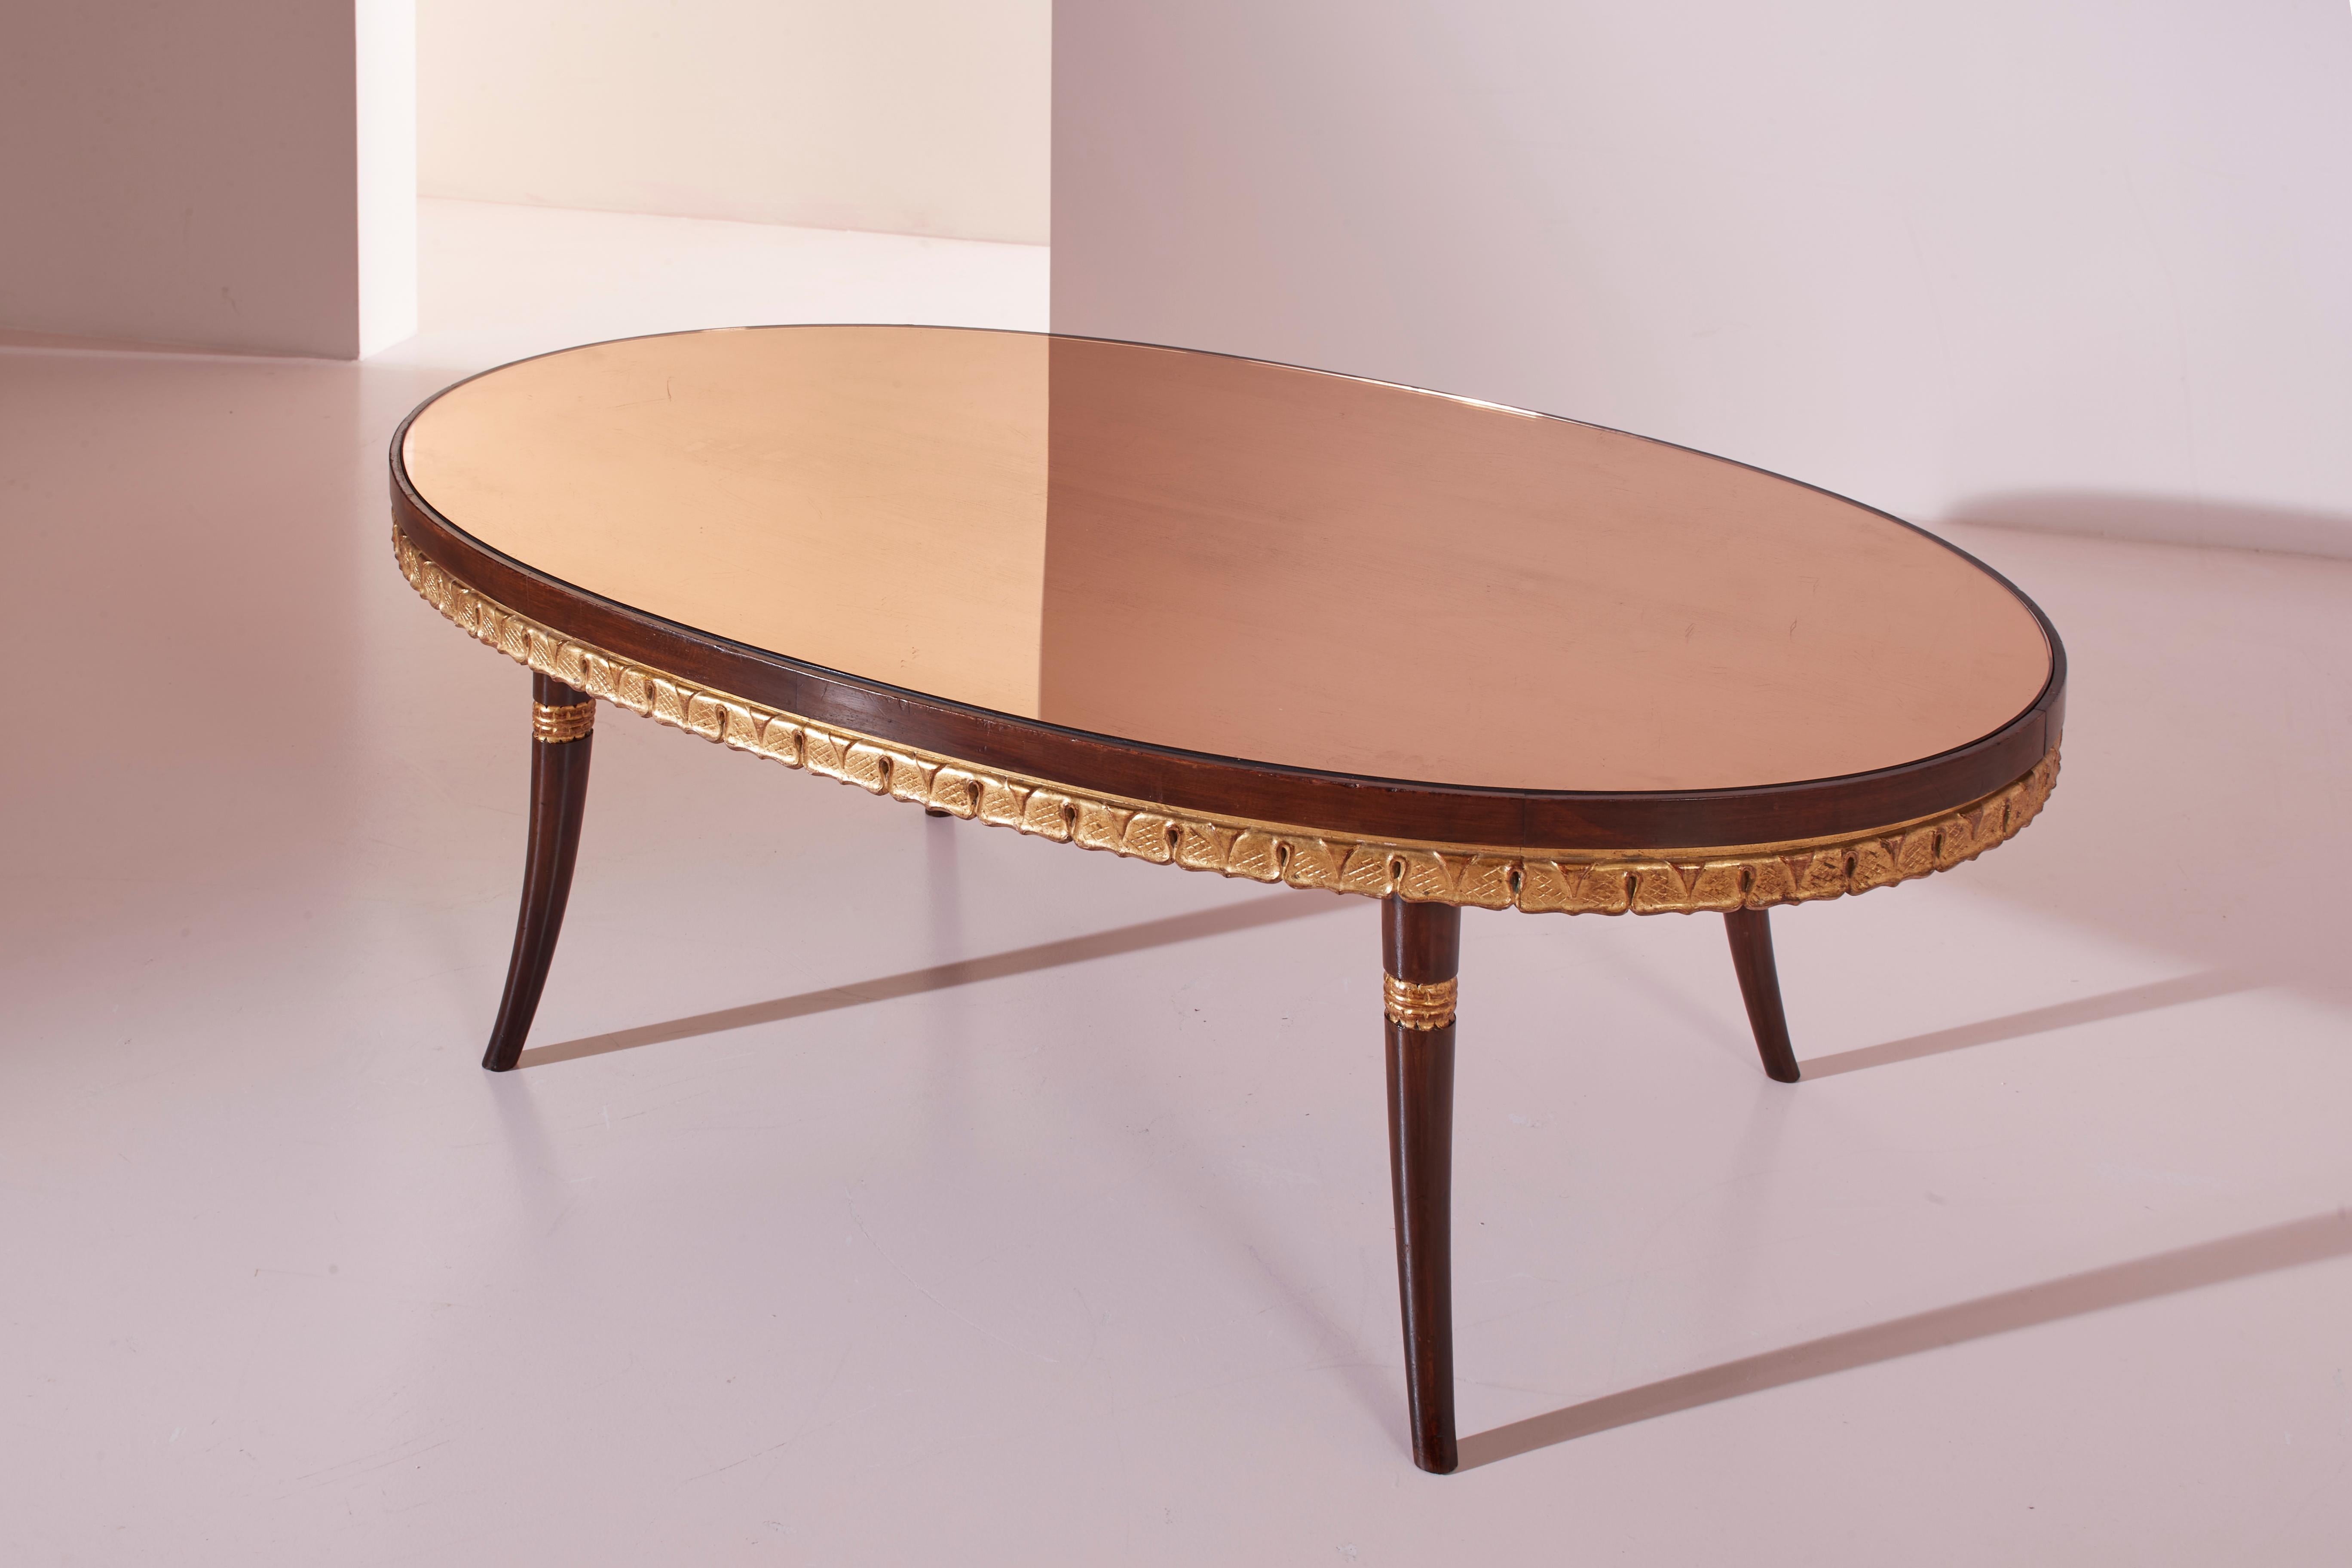 Mirror Paolo buffa coffee table with painted and gilded wood and a mirrored glass top For Sale